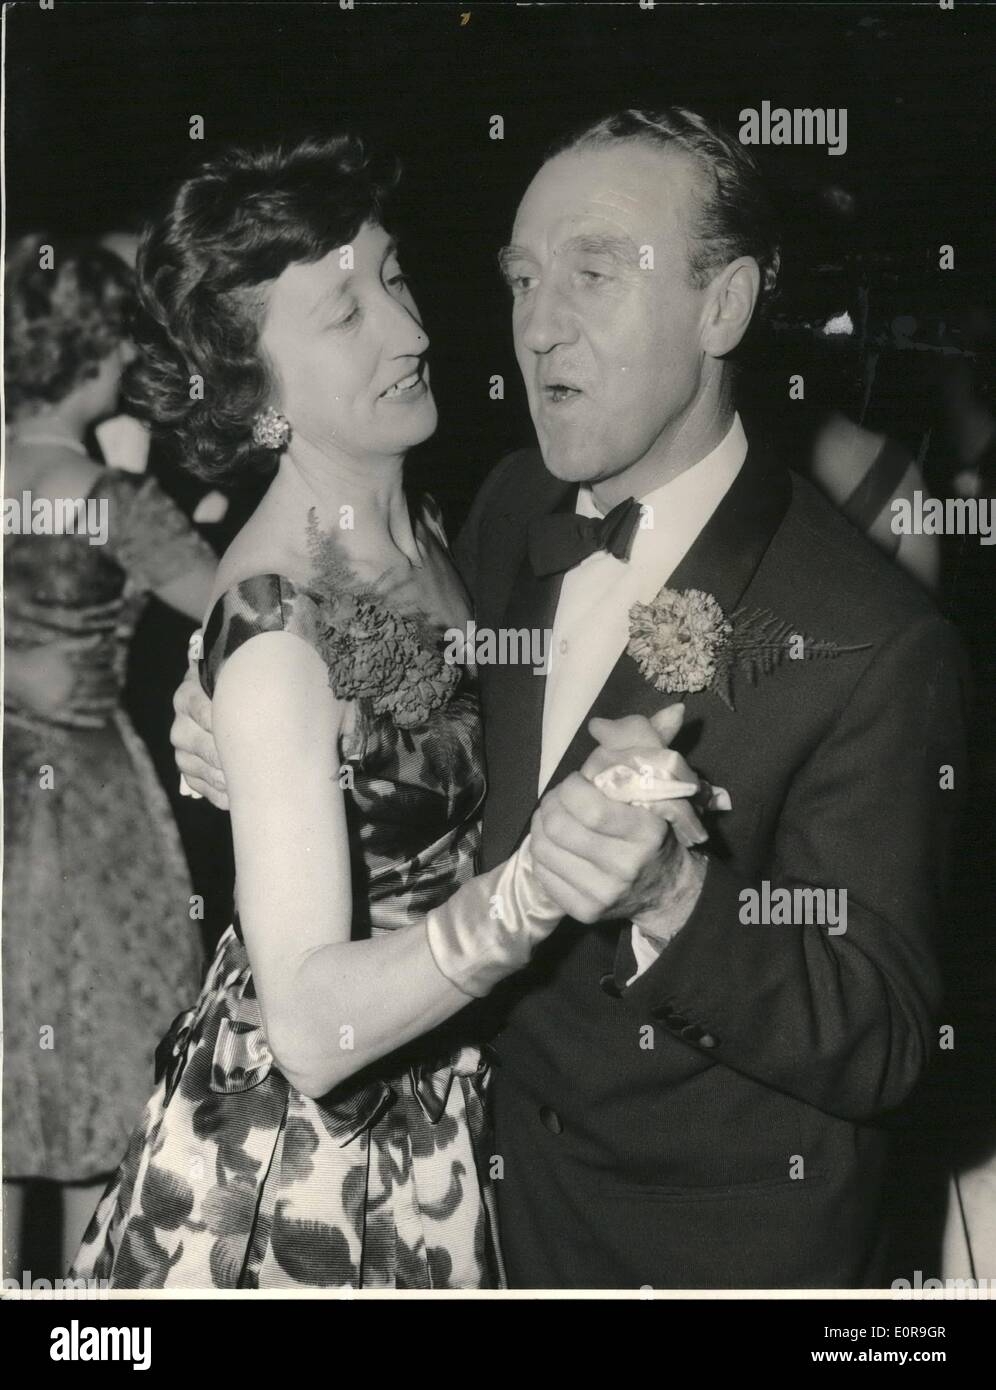 Oct. 11, 1958 - 11-10-58 Conservative Ball at Blackpool. Mr. Marples goes dancing. Keystone Photo Shows: Mr. Ernest Marples the Postmaster General and his wife dancing at the Conservative Party Ball at Blackpool last night. Stock Photo